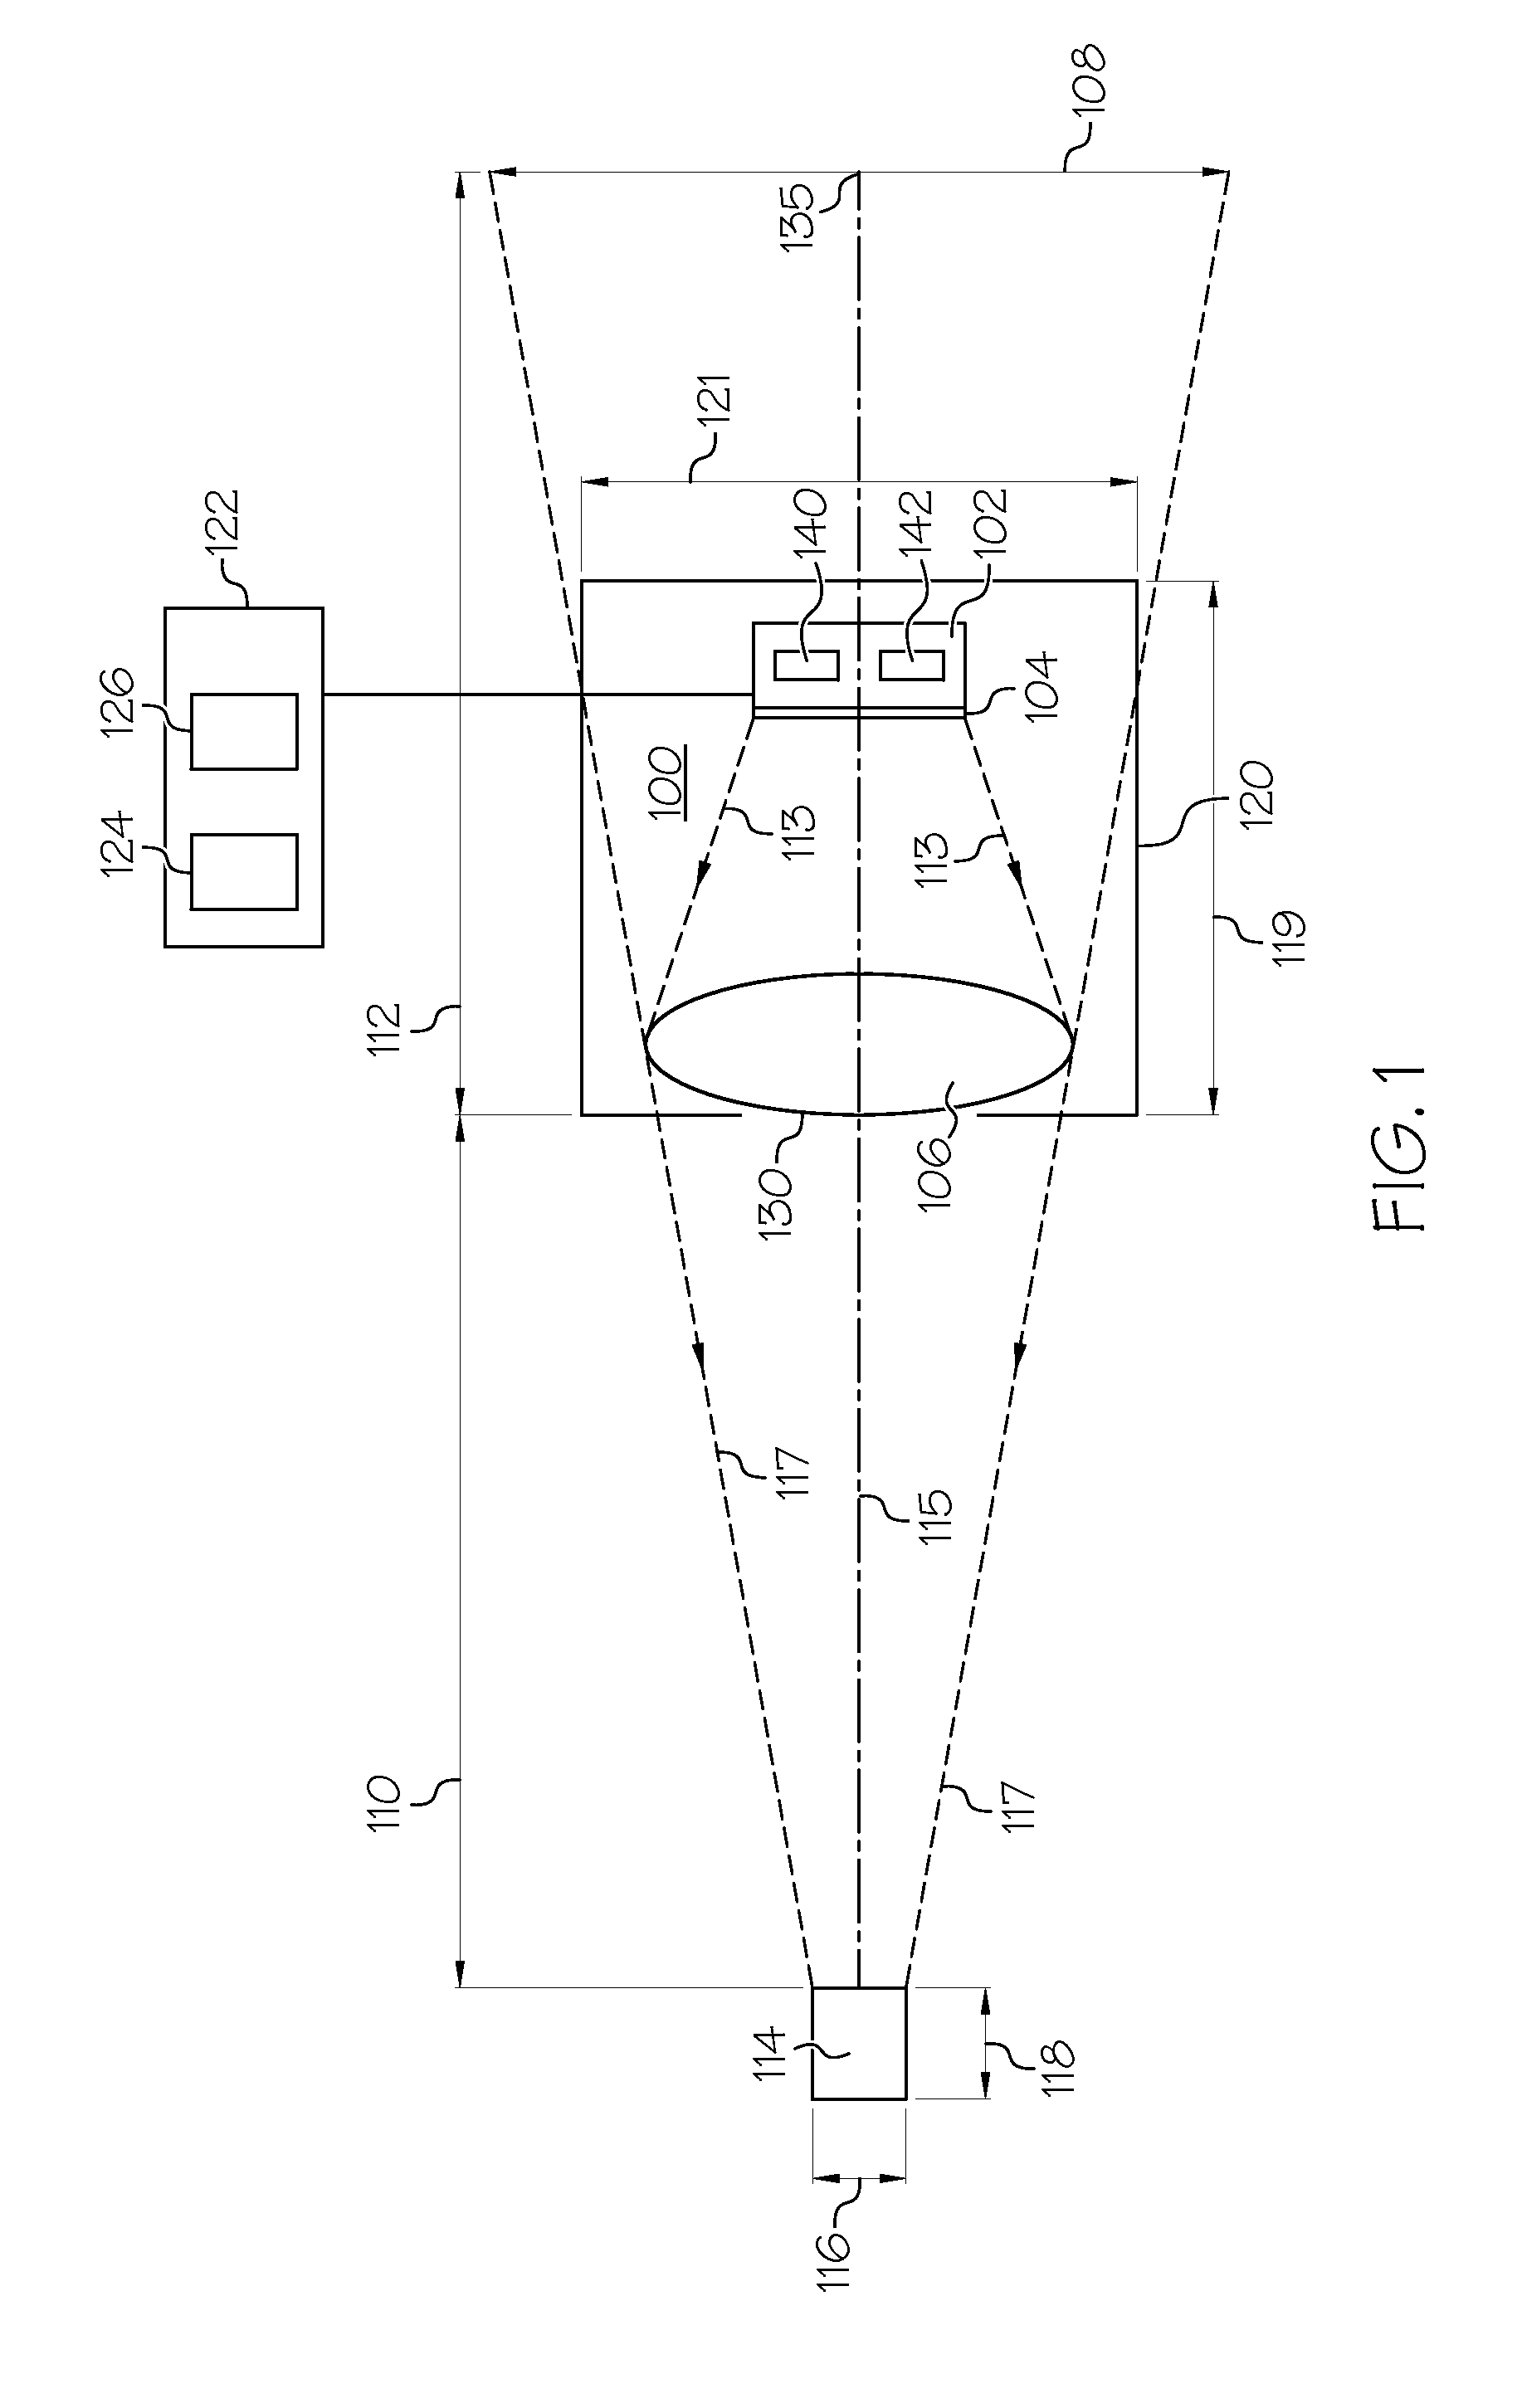 System and method for a compact display